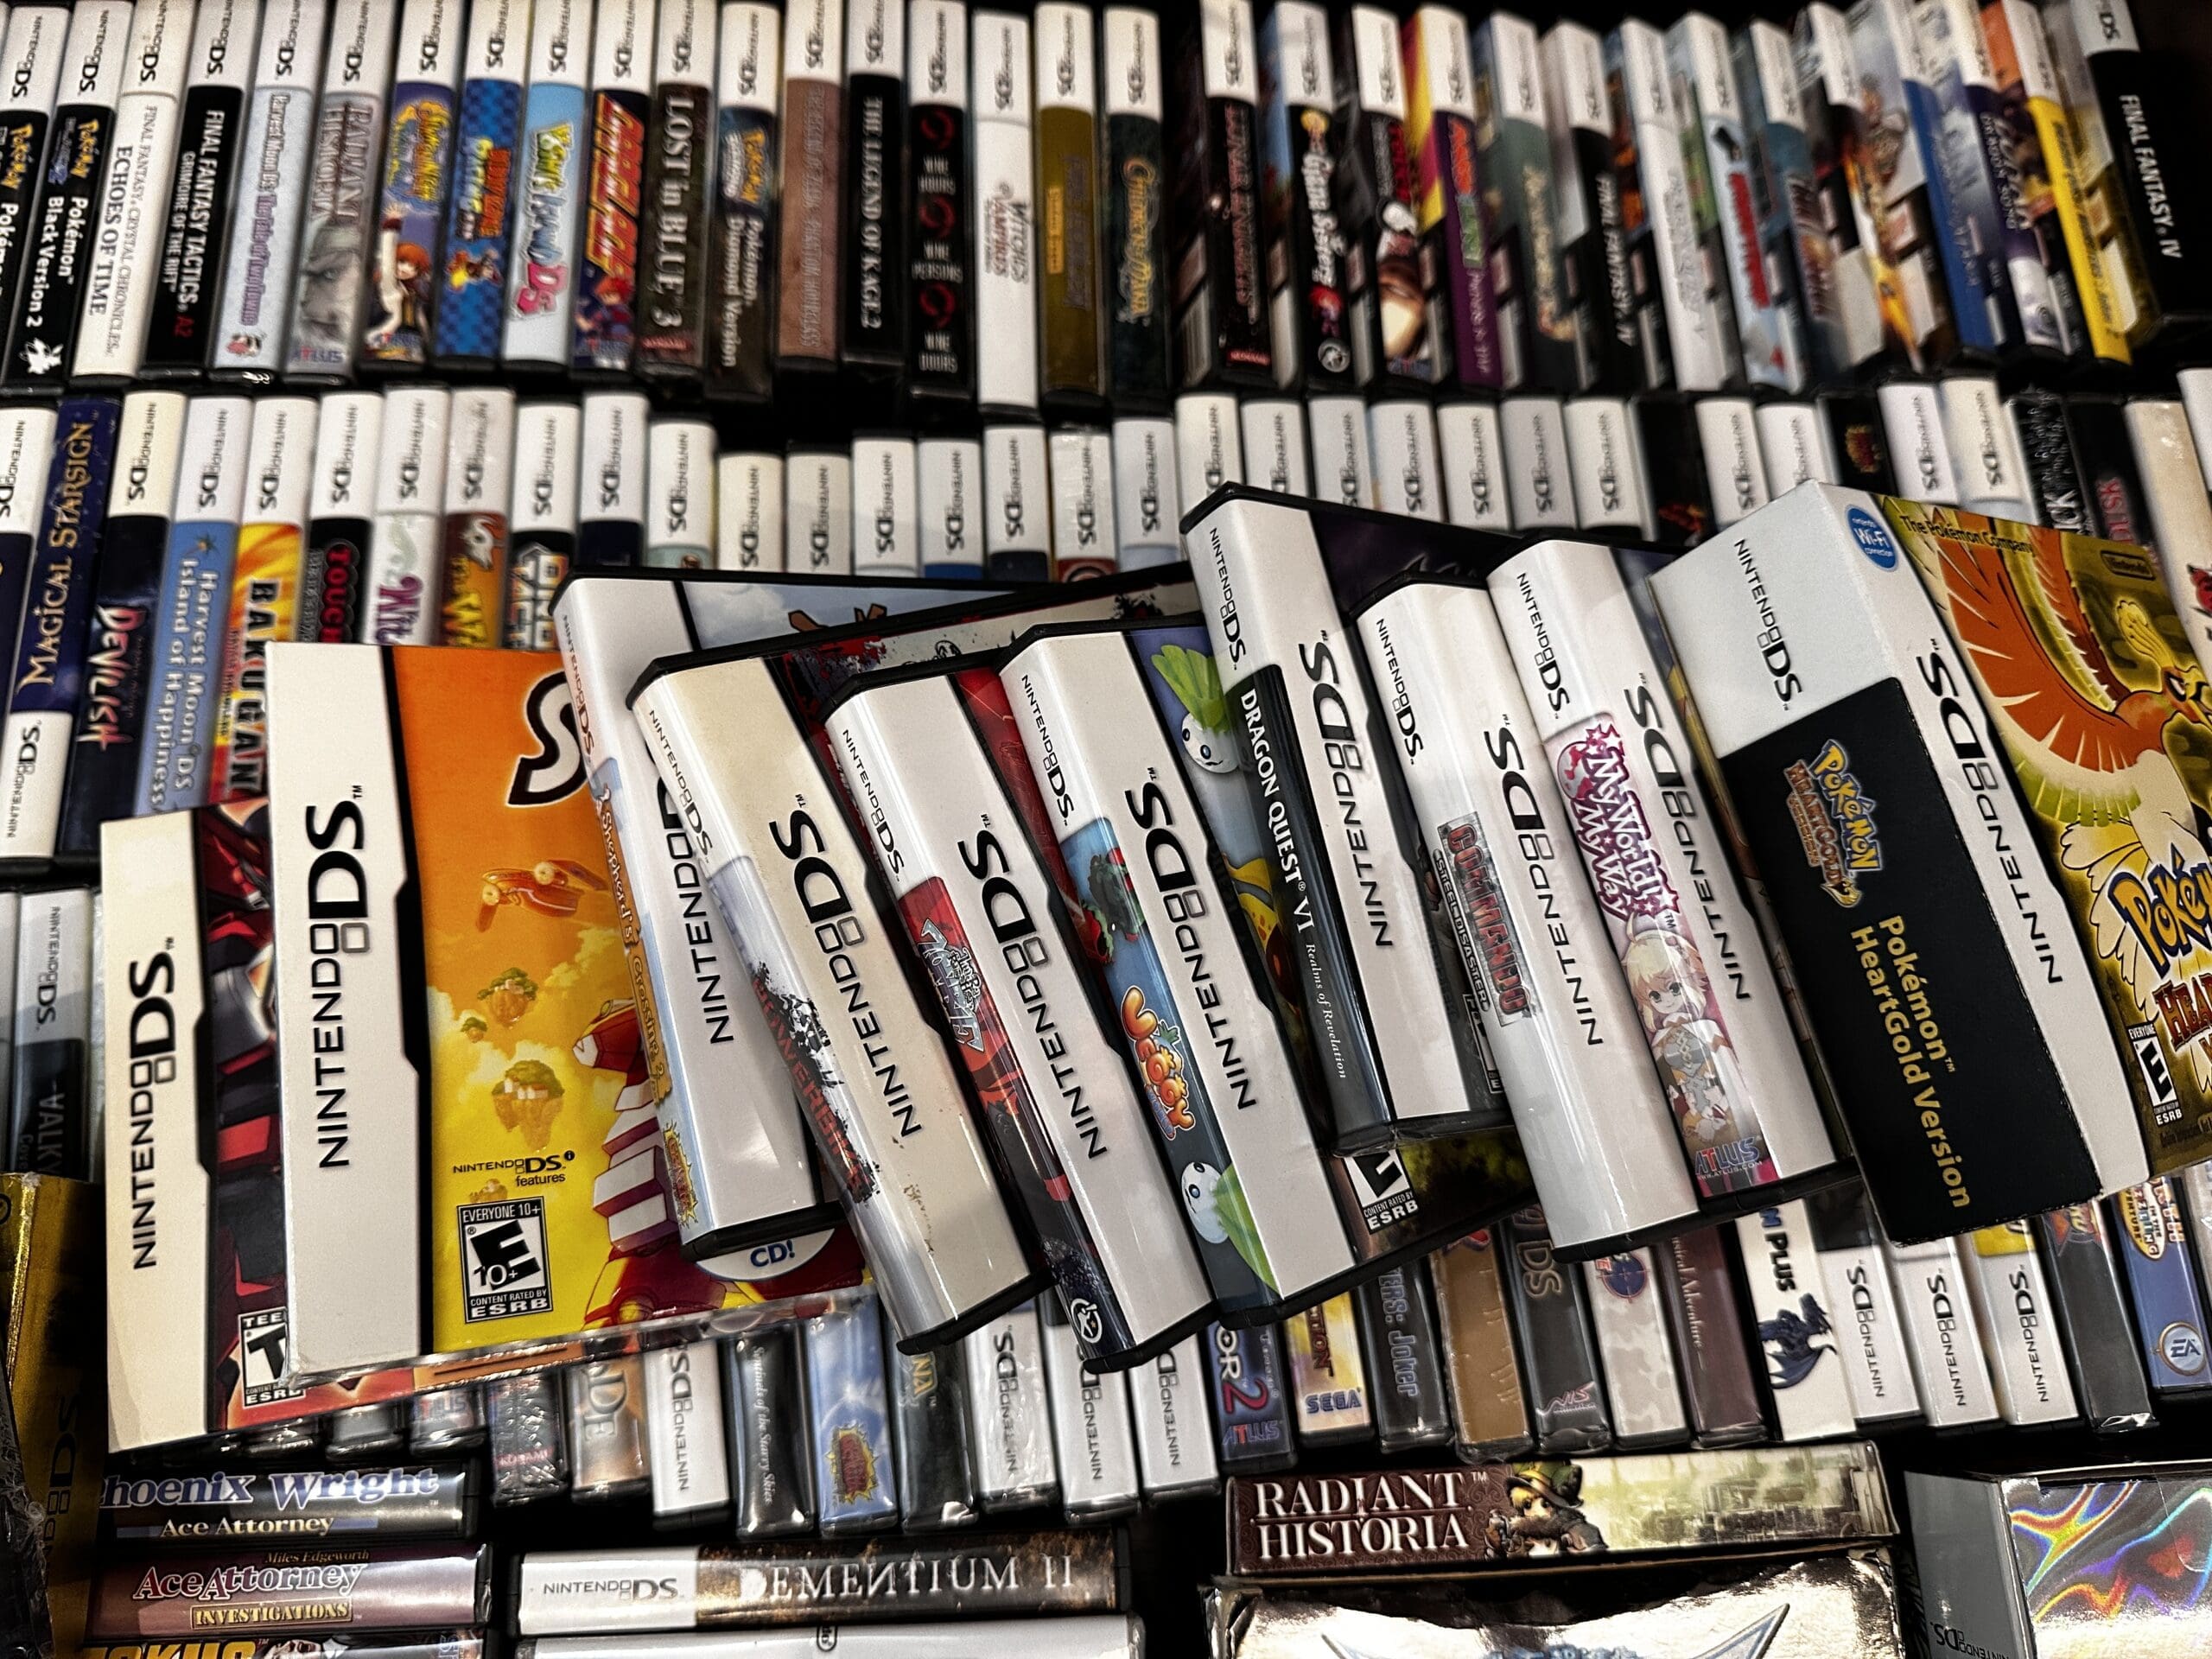 RetroNews Nintendo DS Game Collection